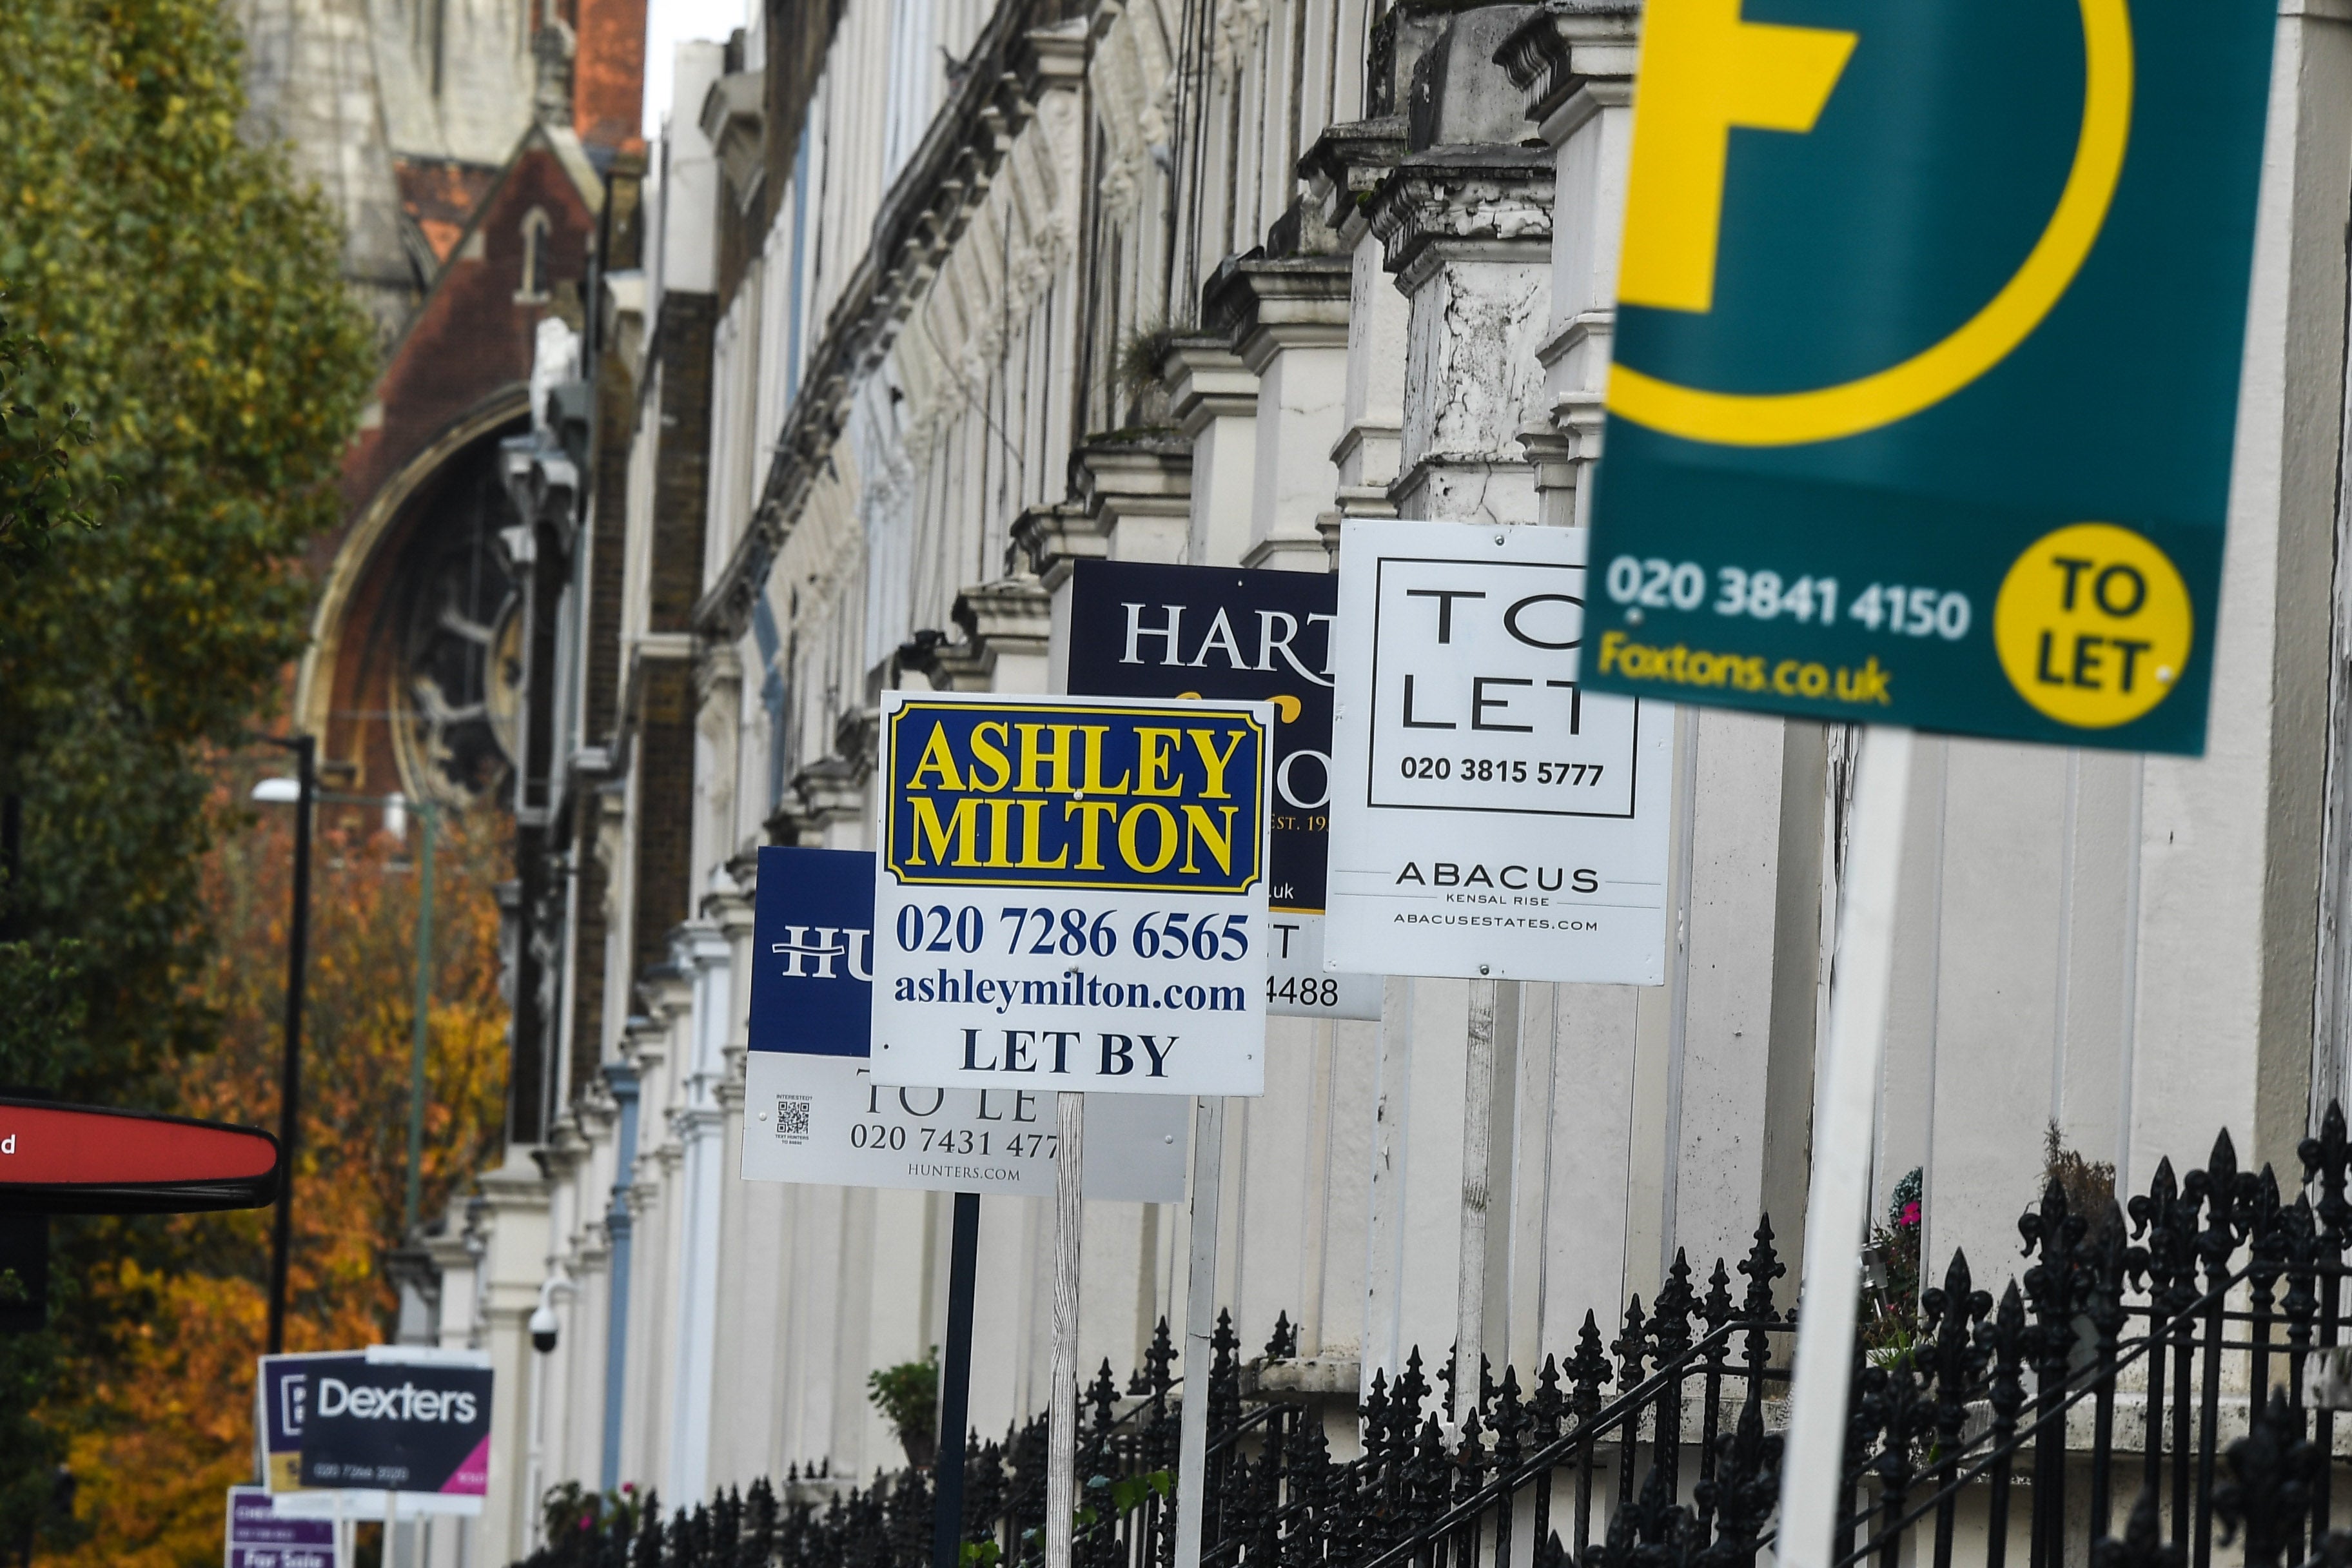 Landlords in England can go ahead with evictions after the hiatus